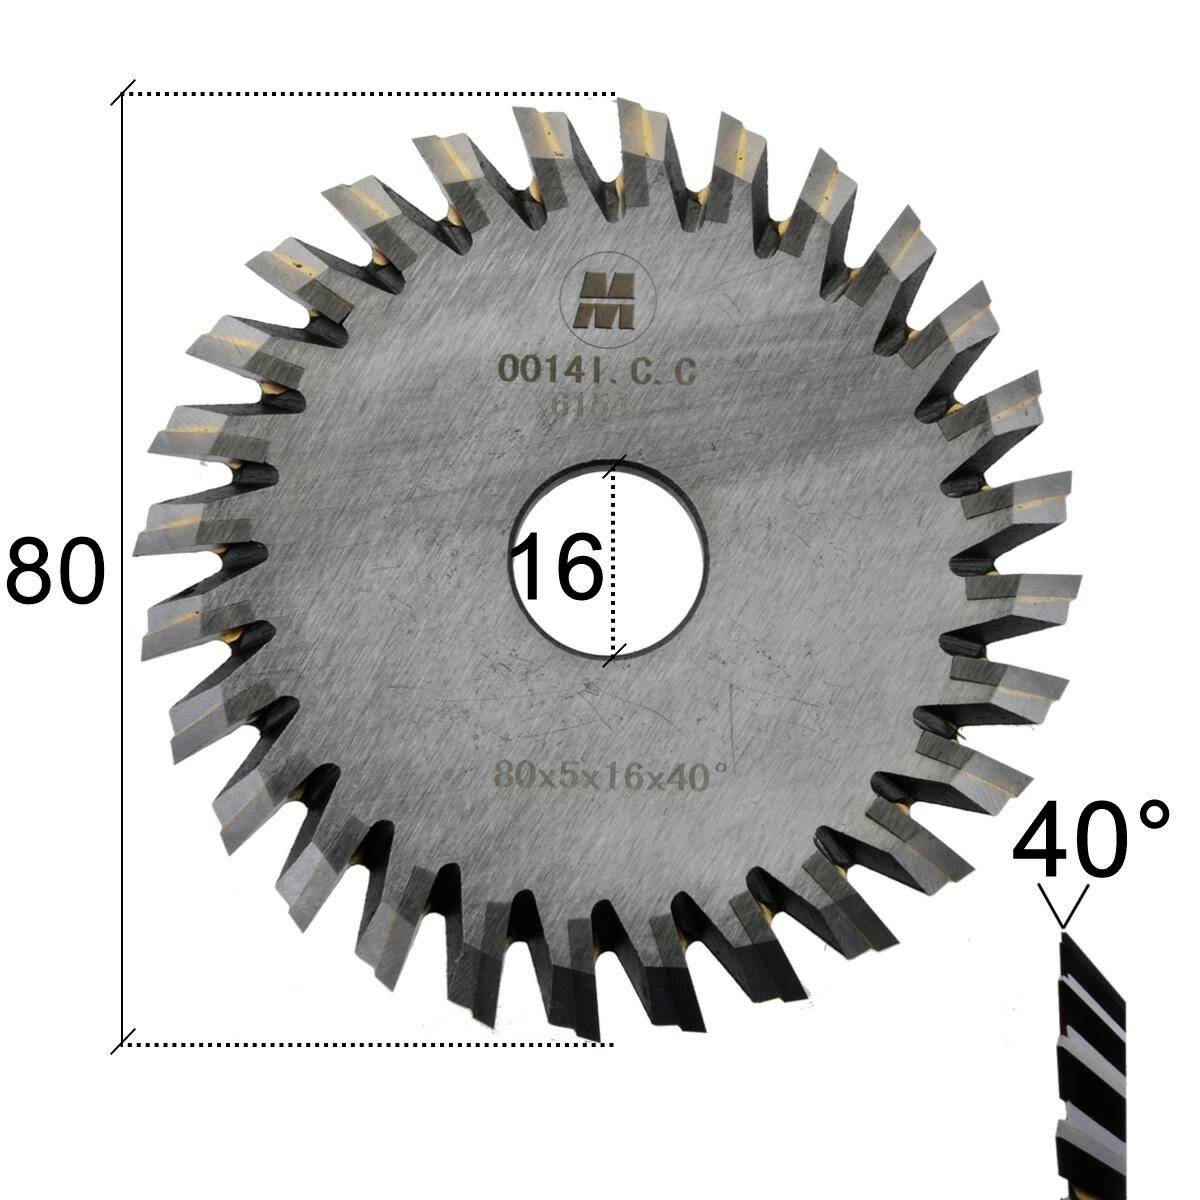 Angle cutter 0014I C. C. - high temperature resistant